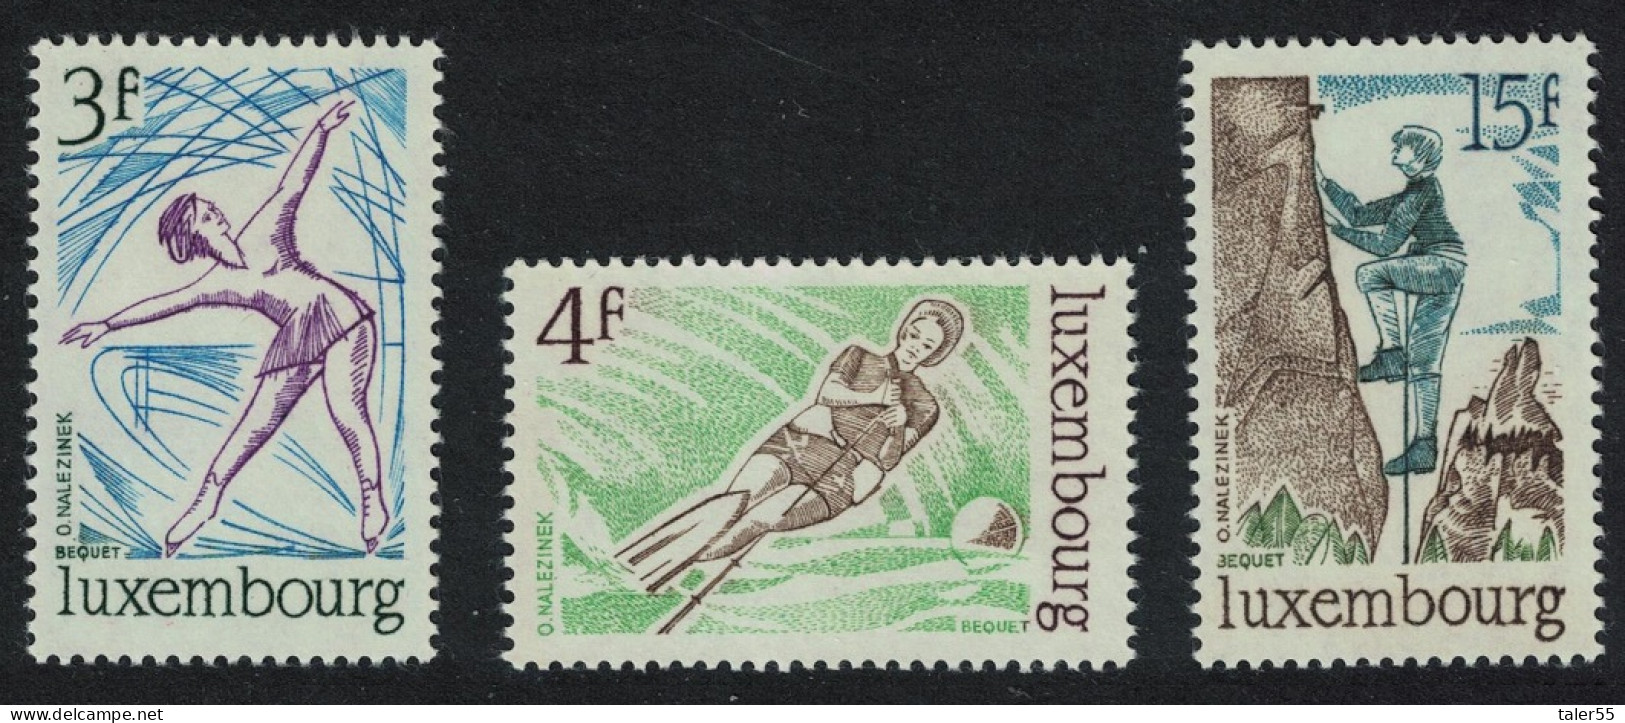 Luxembourg Ice Skating Water Skiing Rock Climbing Sports 1975 MNH SG#954-956 MI#911-913 - Unused Stamps